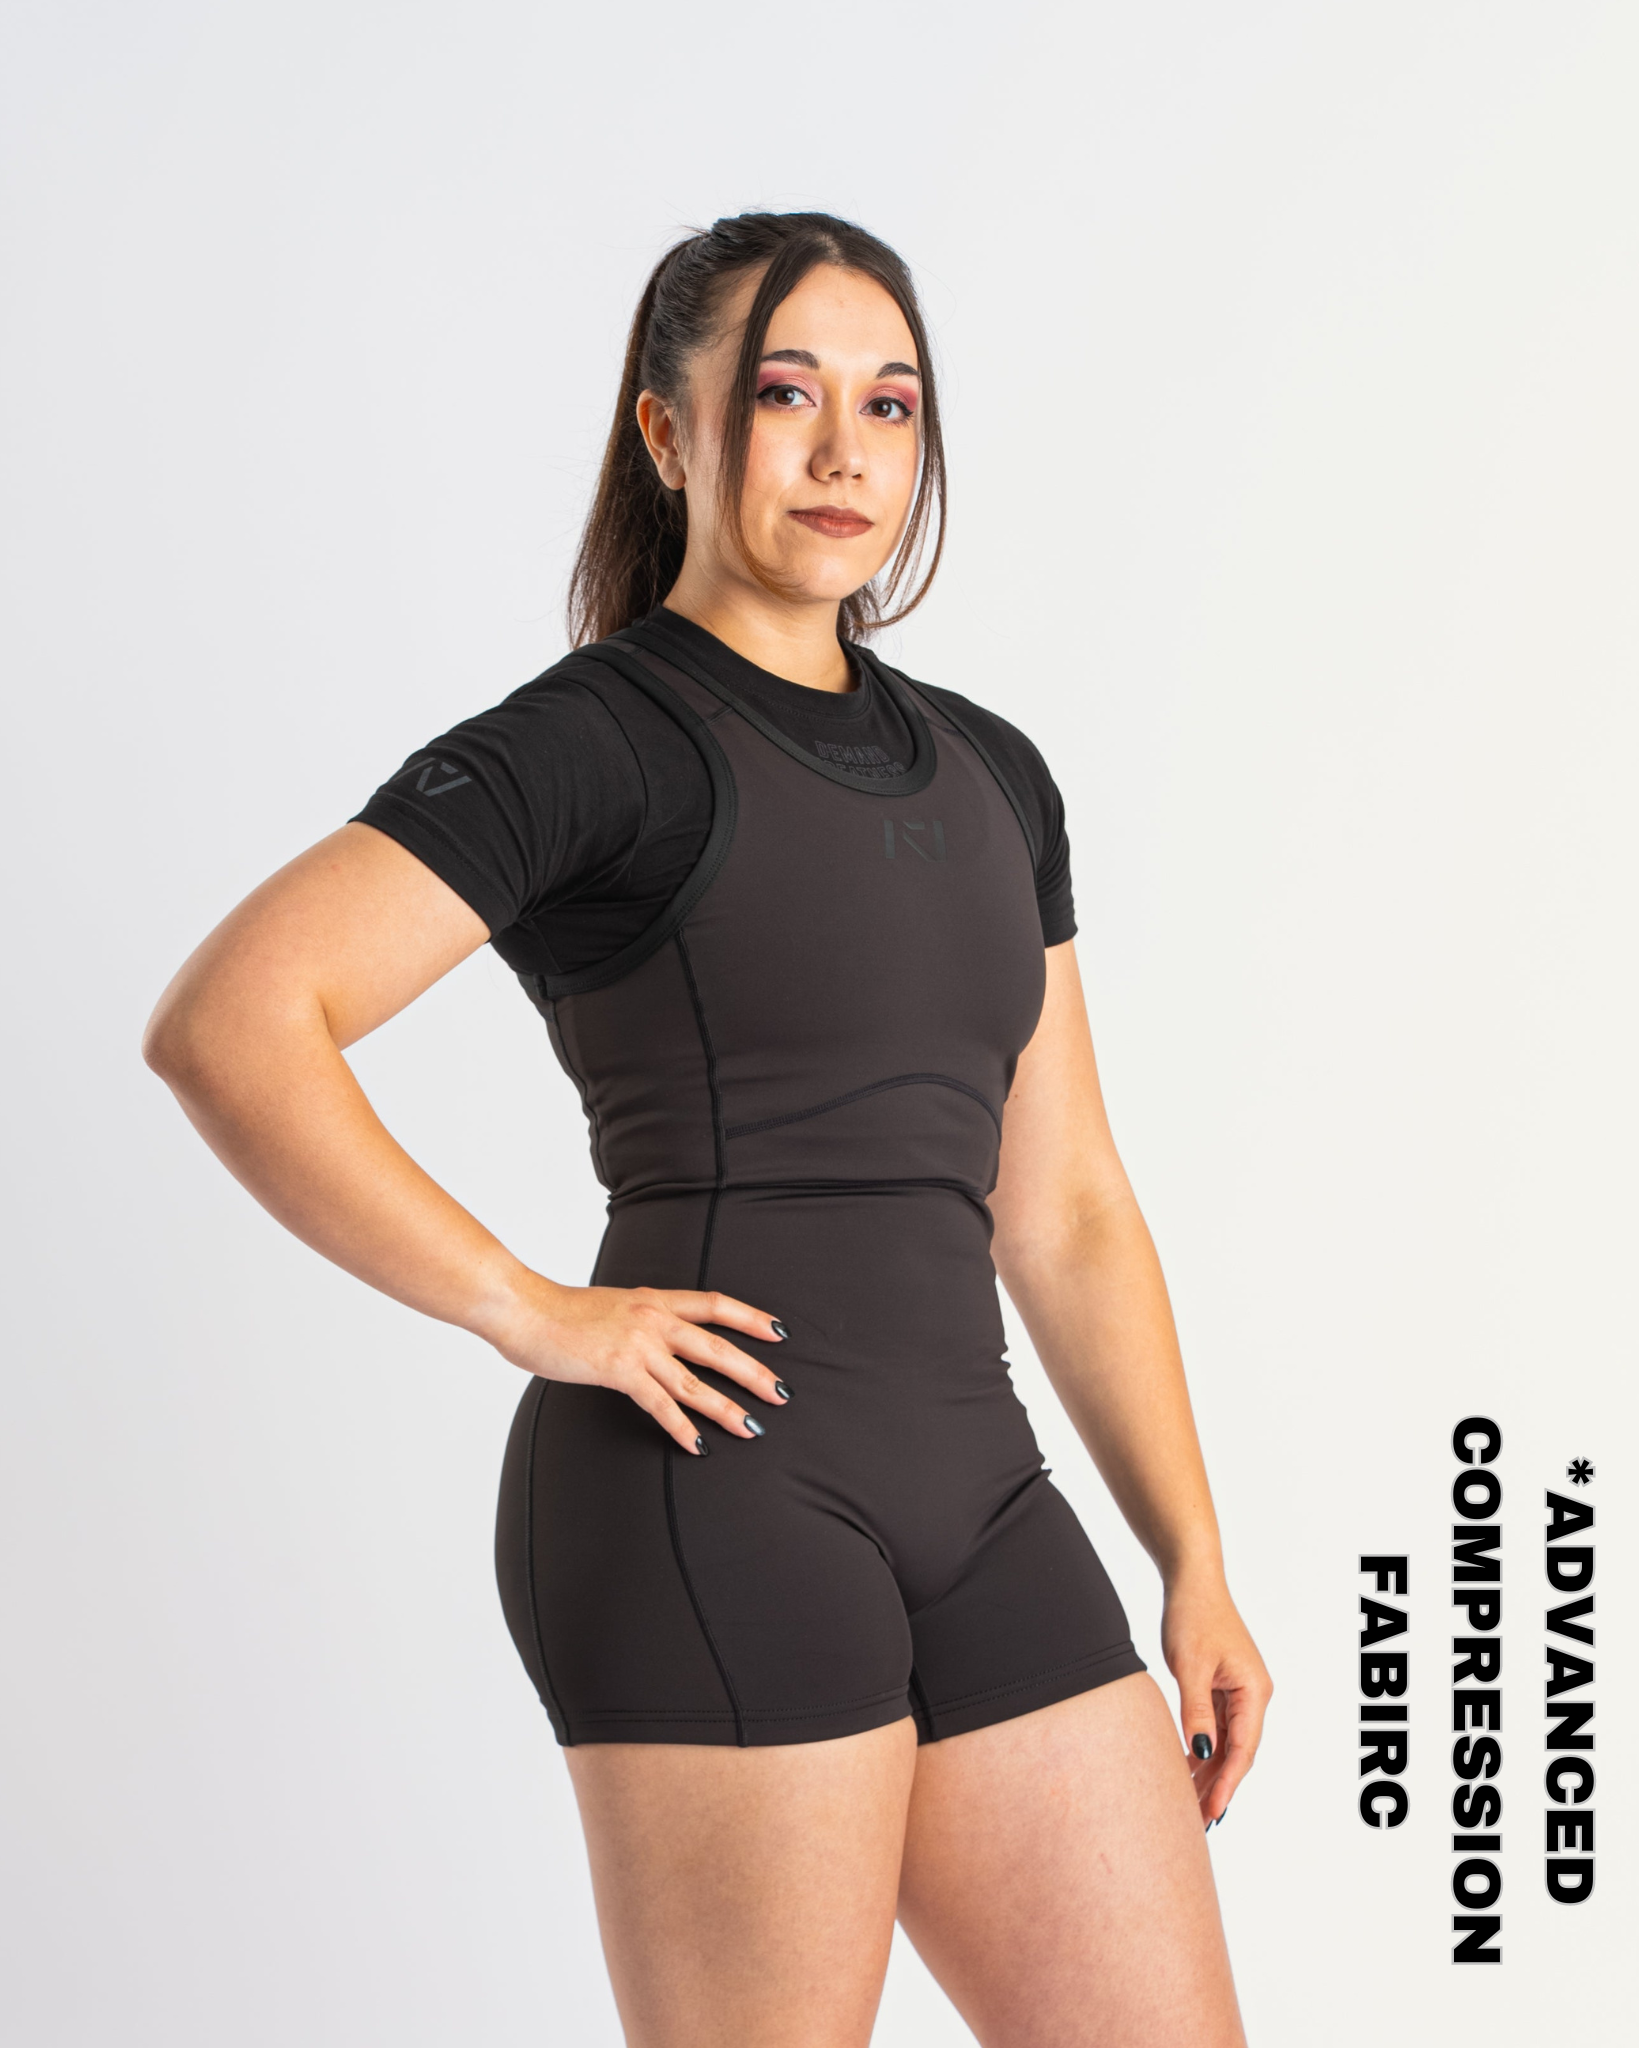 Our IPF APPROVED Rausch Singlets are designed to support the strength and power of an lifter.  A racerback design with advanced compression fabric provides powerlifters ultimate support whilst on the platform. IPF Approved Kit includes Rausch Powerlifting Singlet, A7 Meet Shirt, A7 Zebra Wrist Wraps, A7 Deadlift Socks, Hourglass Knee Sleeves (Stiff Knee Sleeves and Rigor Mortis Knee Sleeves). All A7 Powerlifting Equipment shipping to UK, Norway, Switzerland and Iceland.